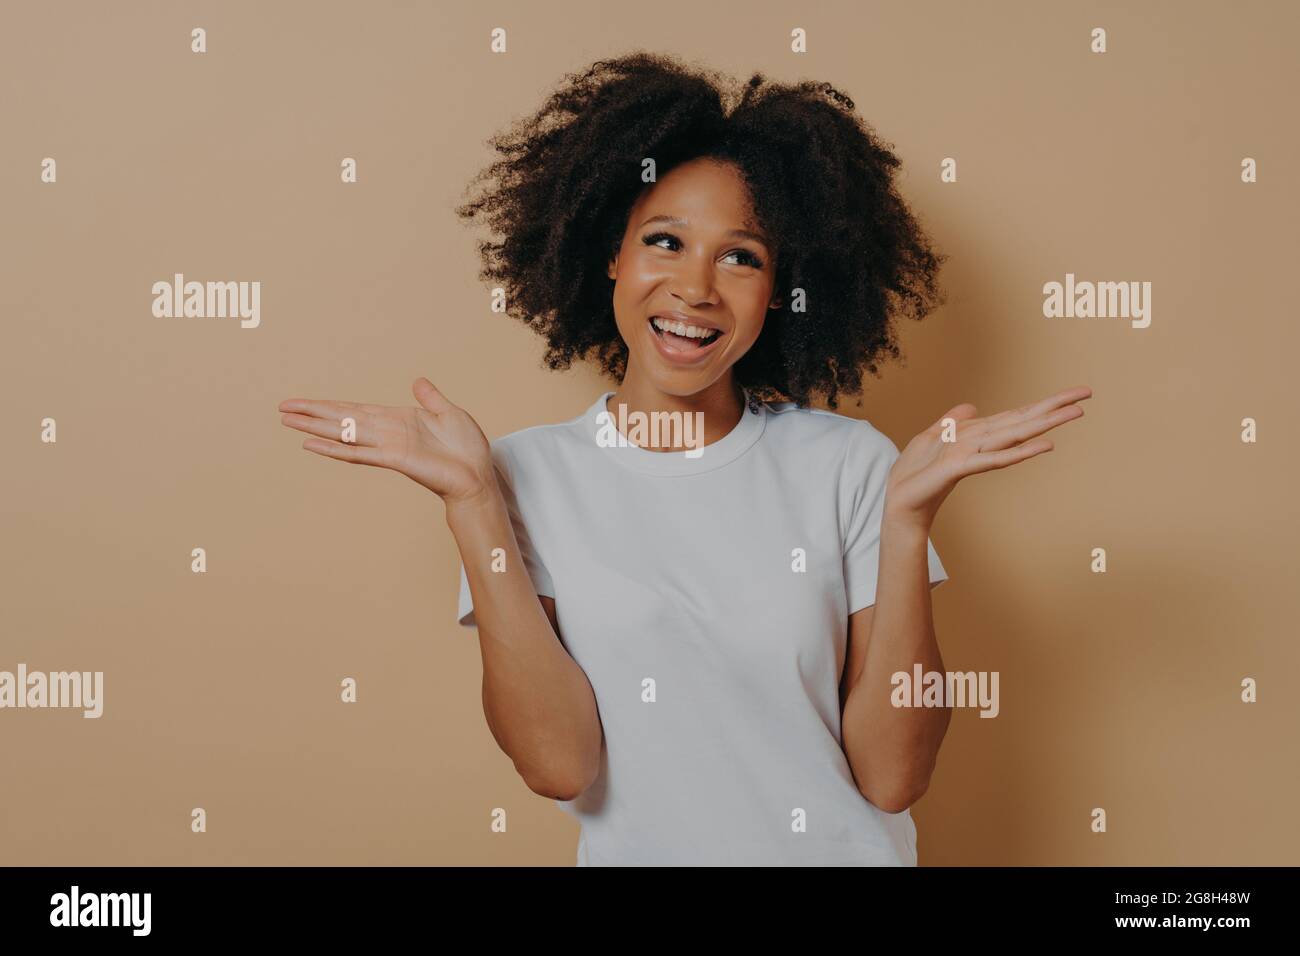 Young smiling mixed race woman raising hands with hesitation, isolated on beige background Stock Photo